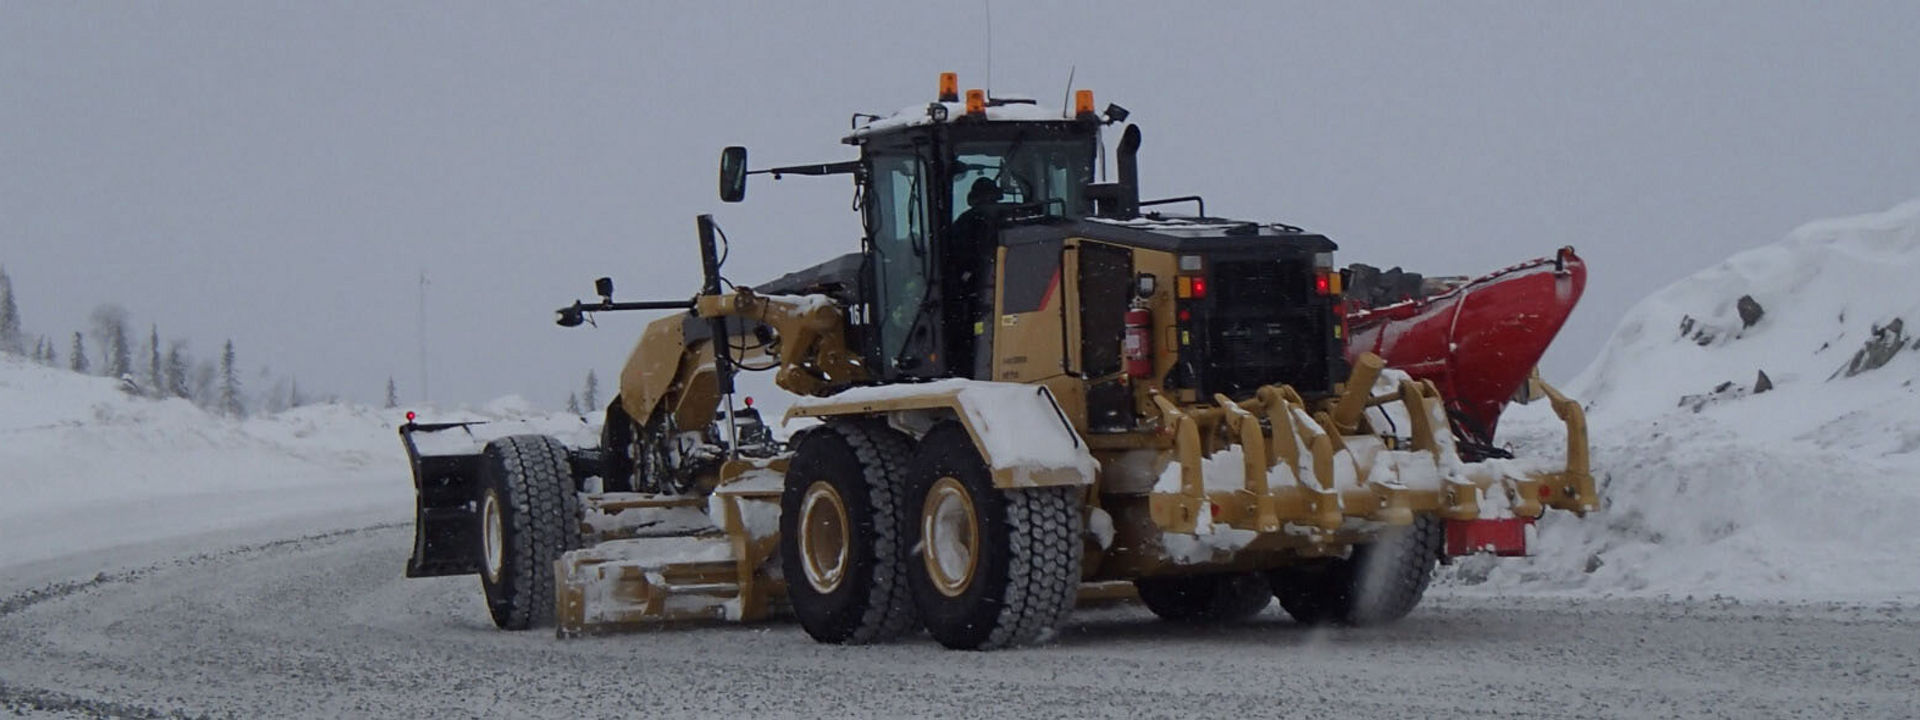 A grader equipped with Bridgestone off-the-road tyres